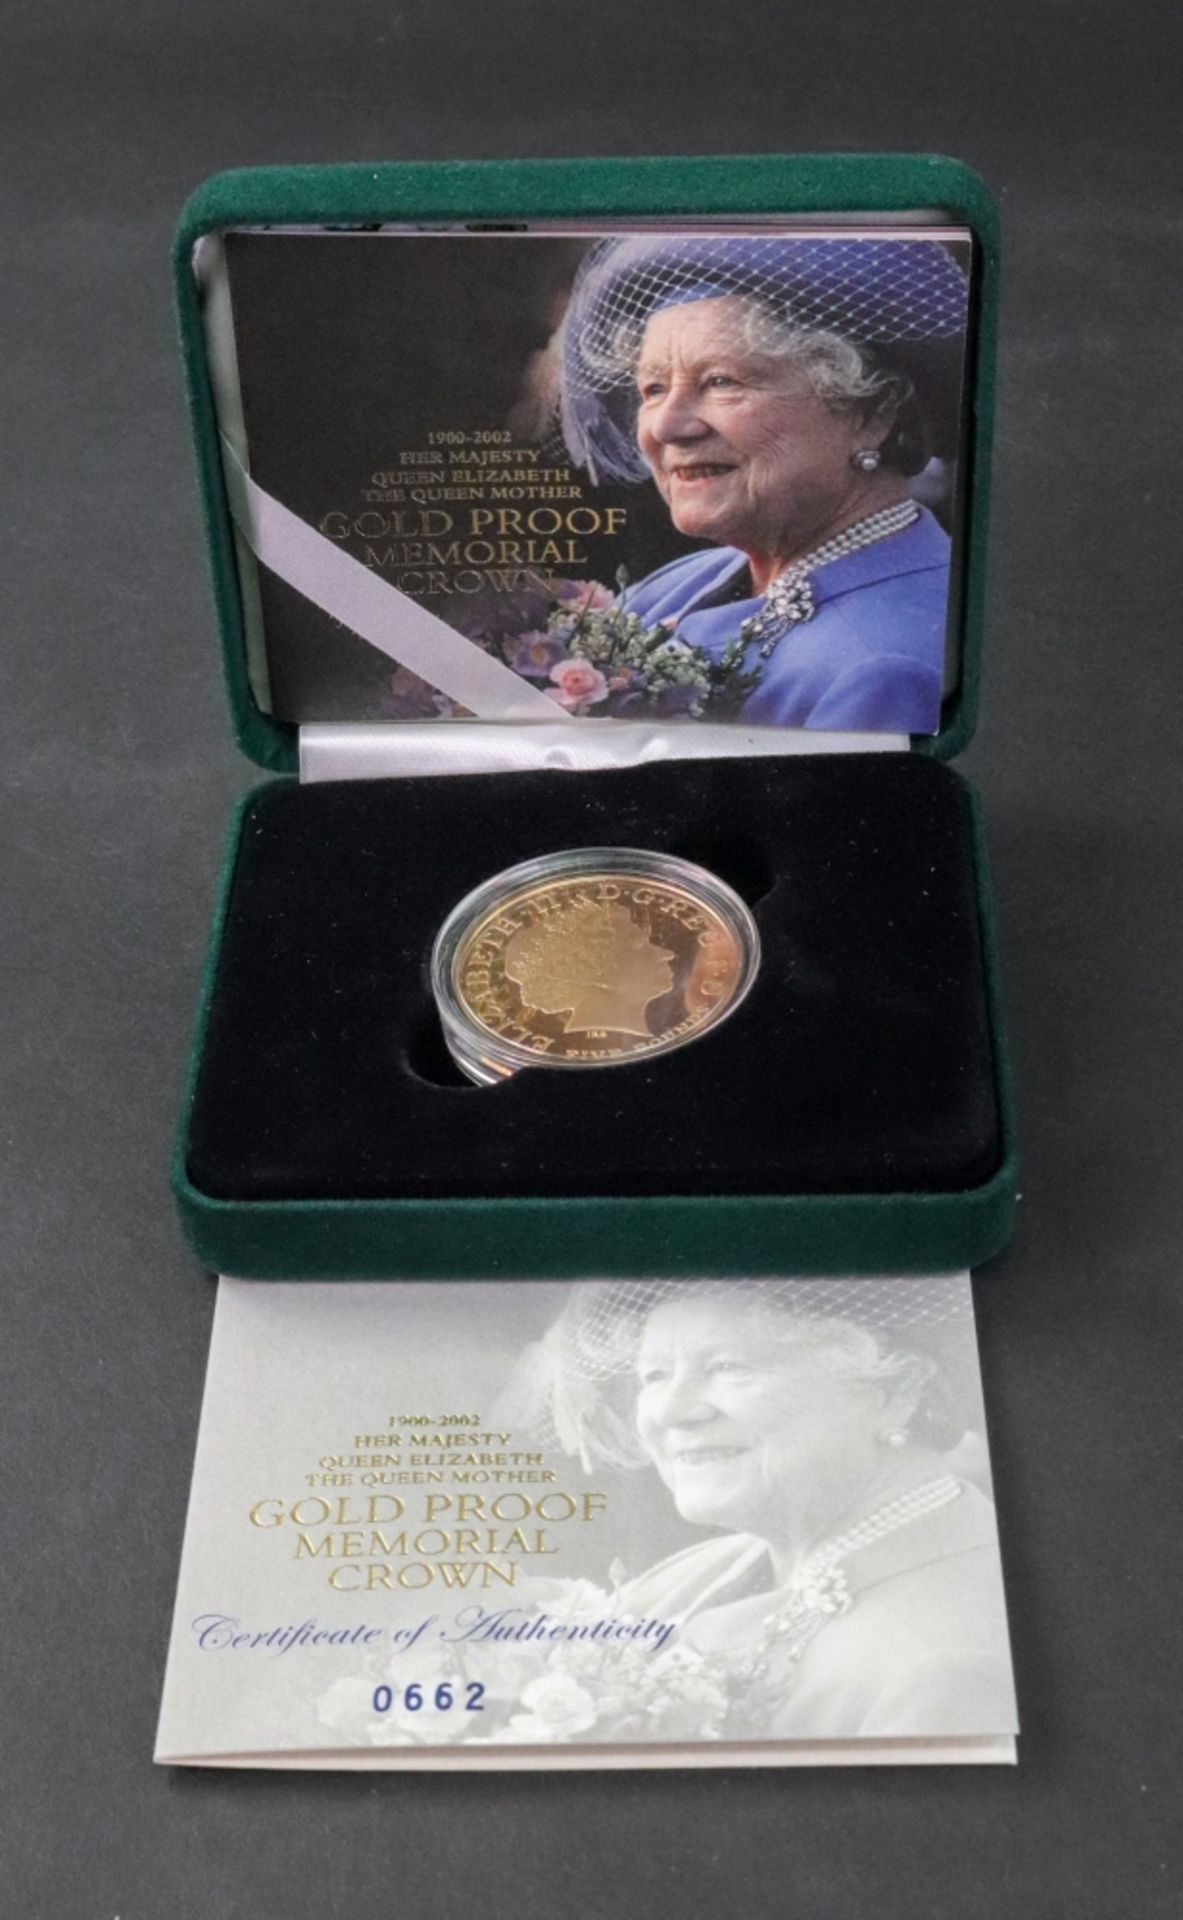 A gold proof memorial crown five pounds, Her Majesty Queen Elizabeth The Queen Mother, 1900-2002,